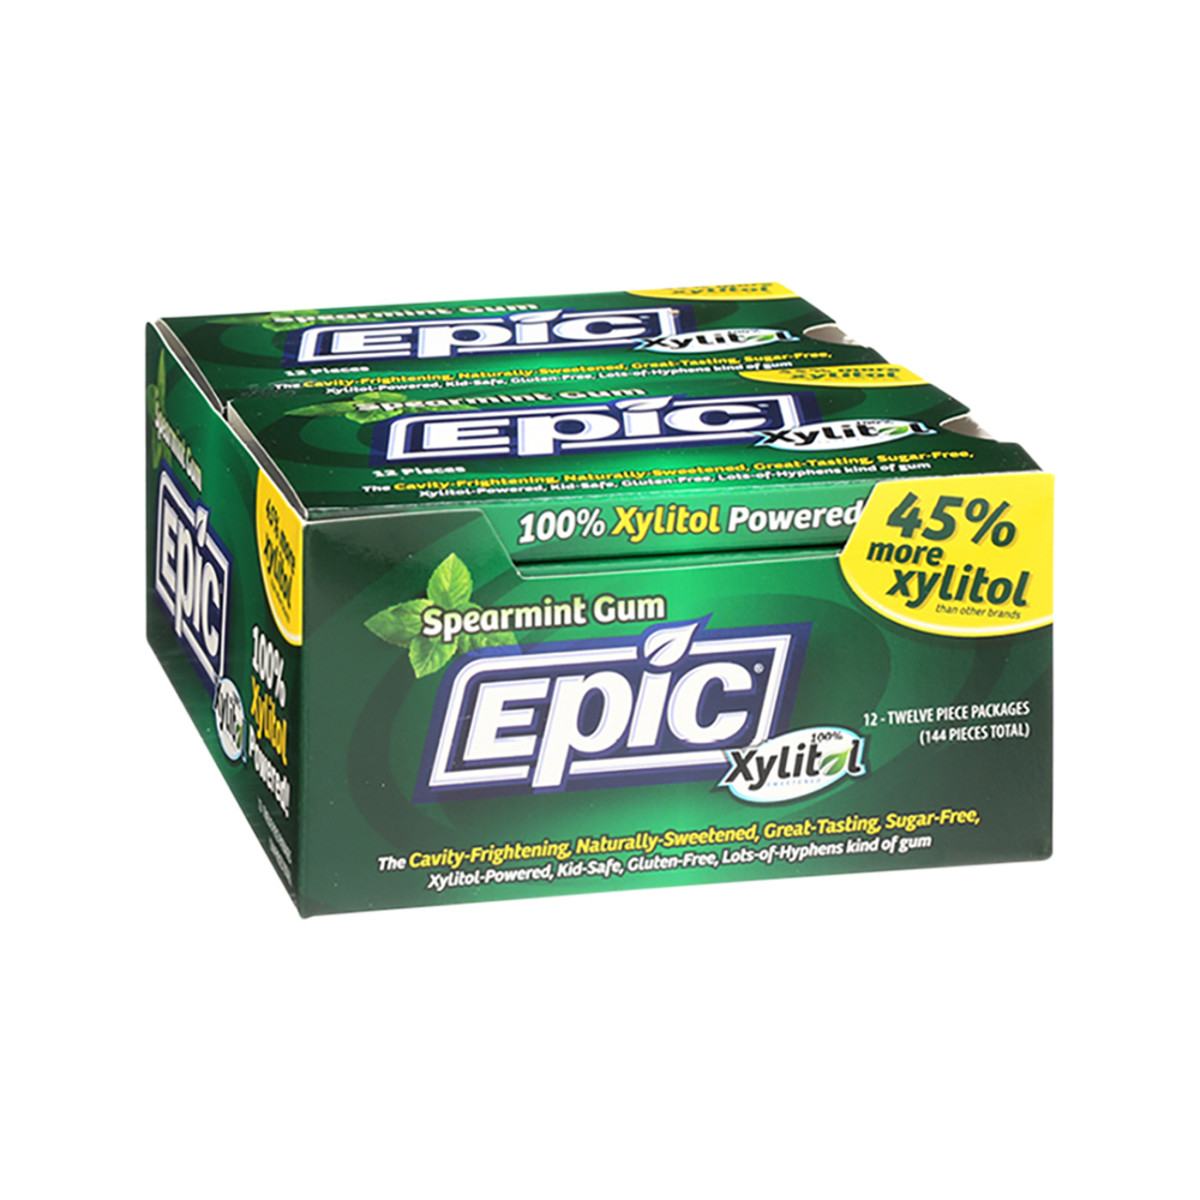 Epic Xylitol (Sugar-Free) Gum Spearmint 12 Piece Blister Pack x 12 Display